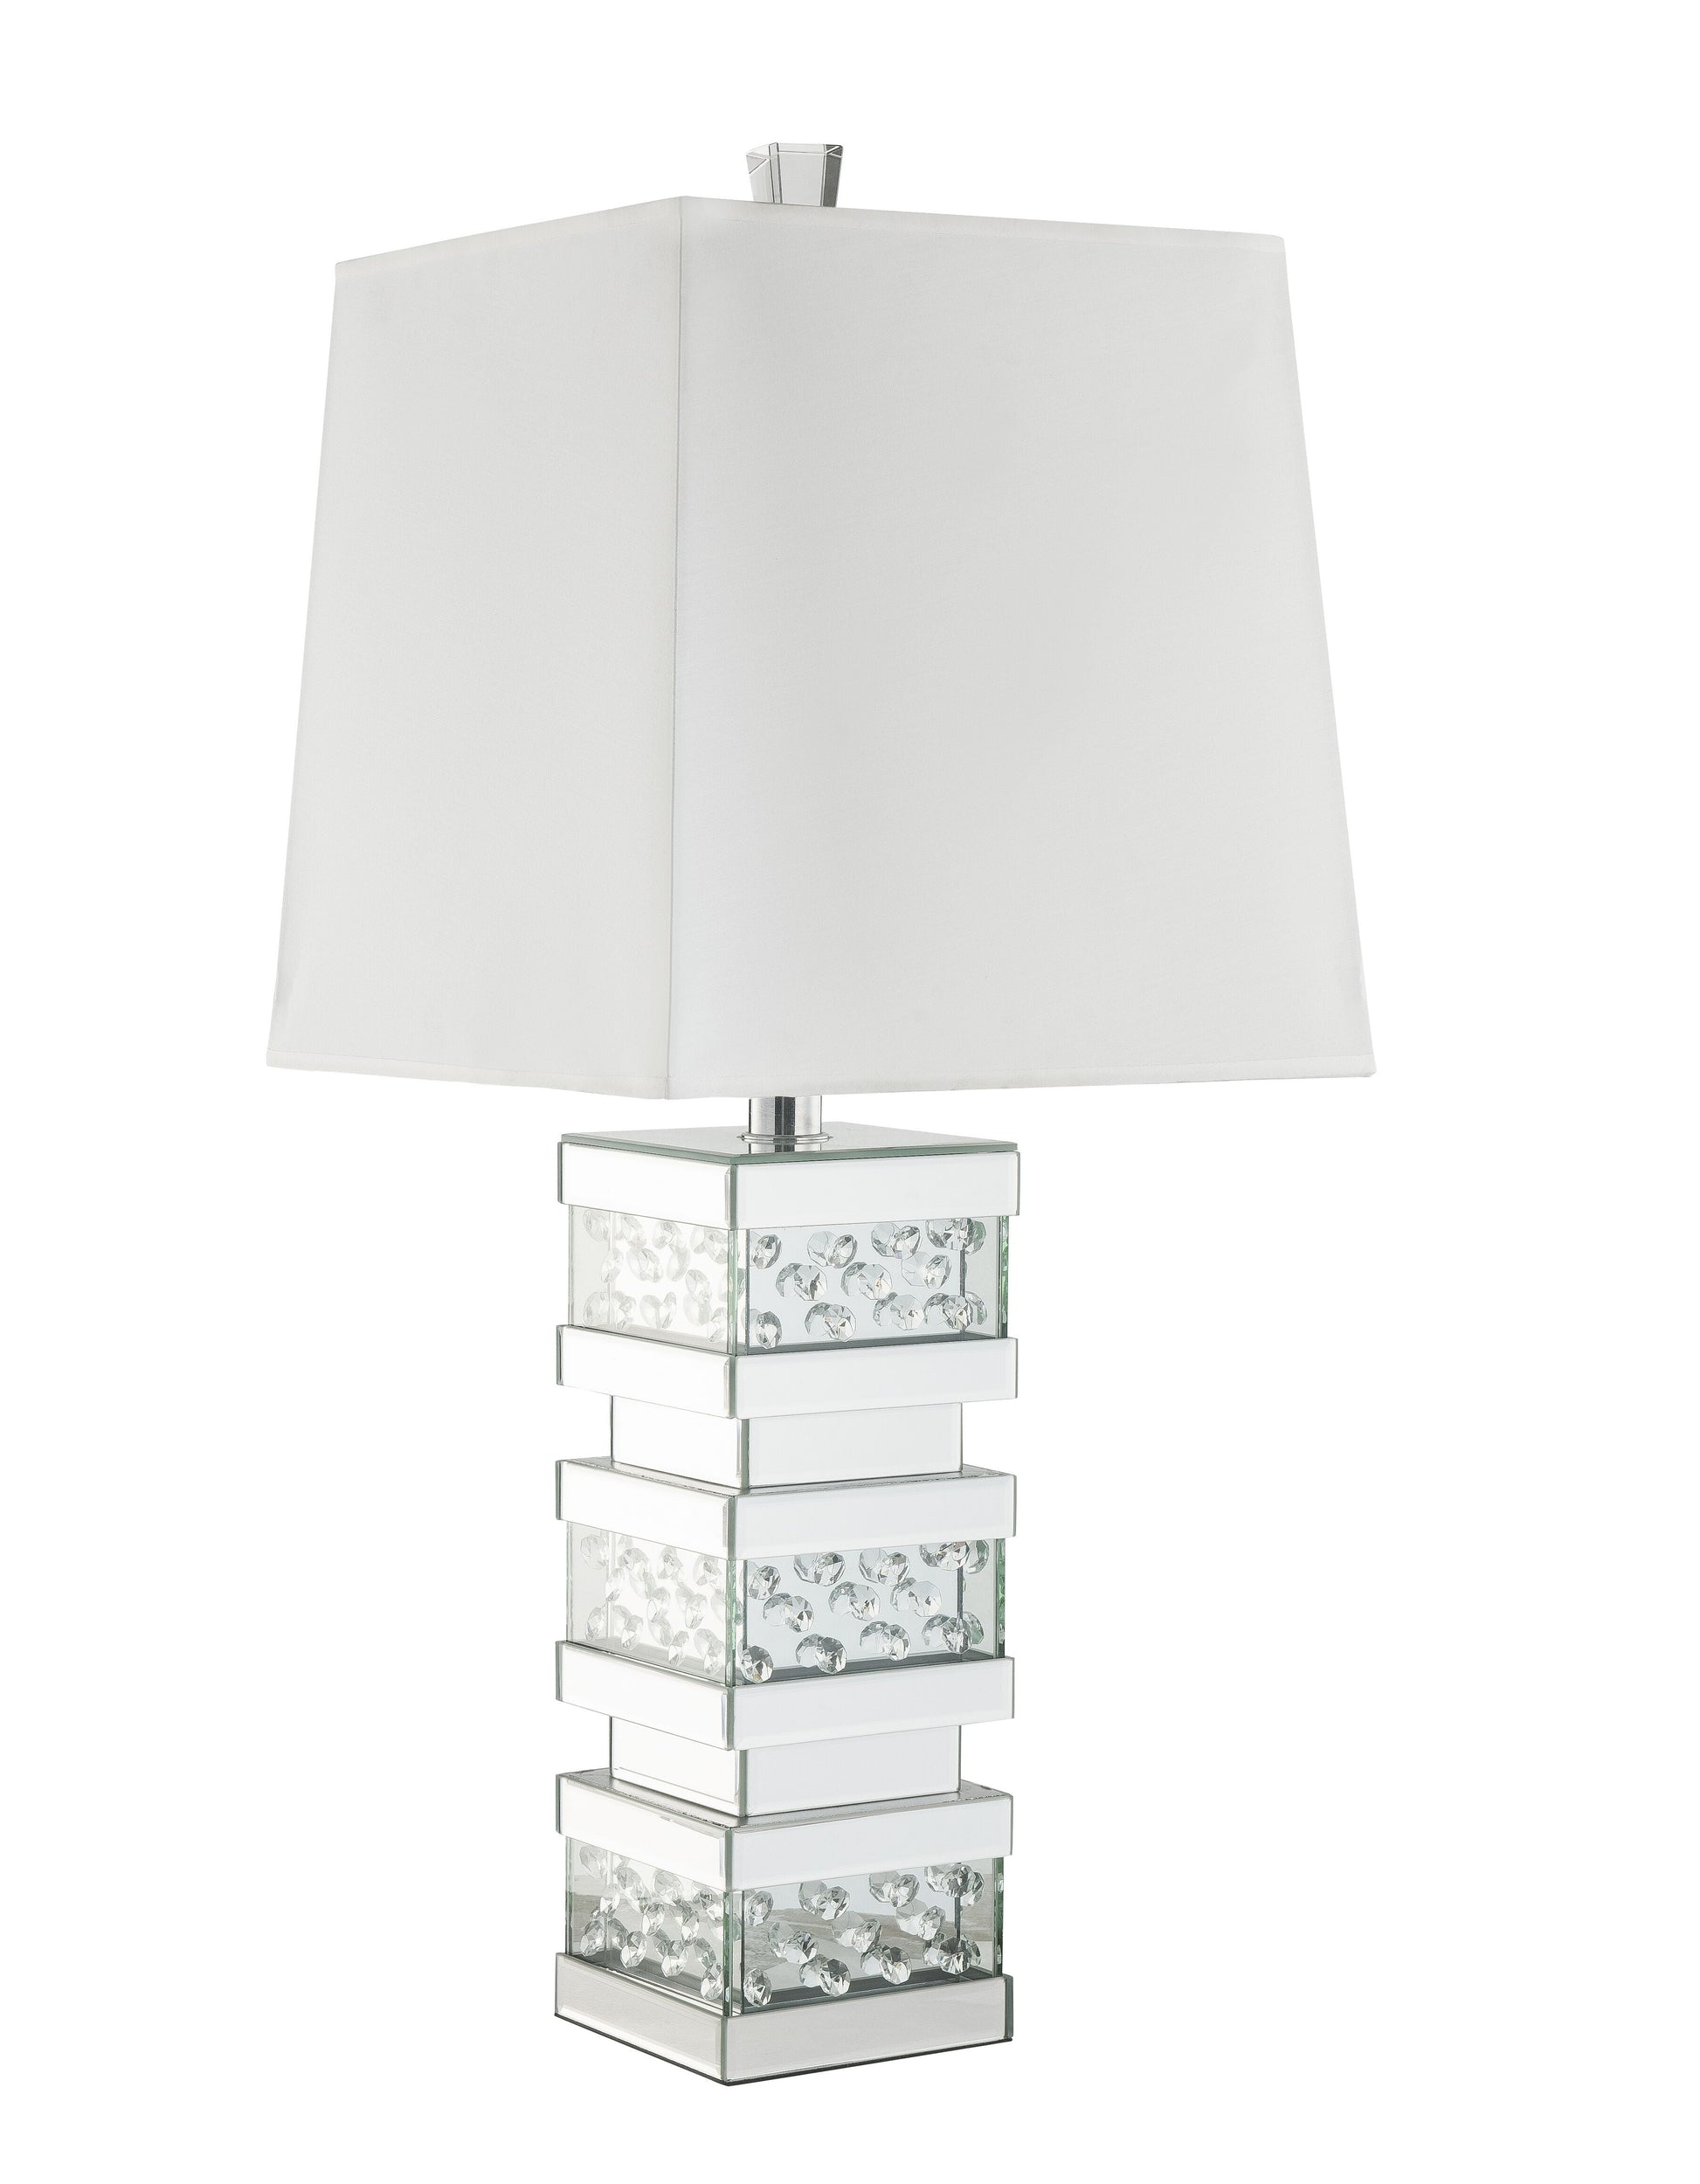 Nysa Table Lamp in Mirrored & Faux Crystals 40217 - Demine Essentials